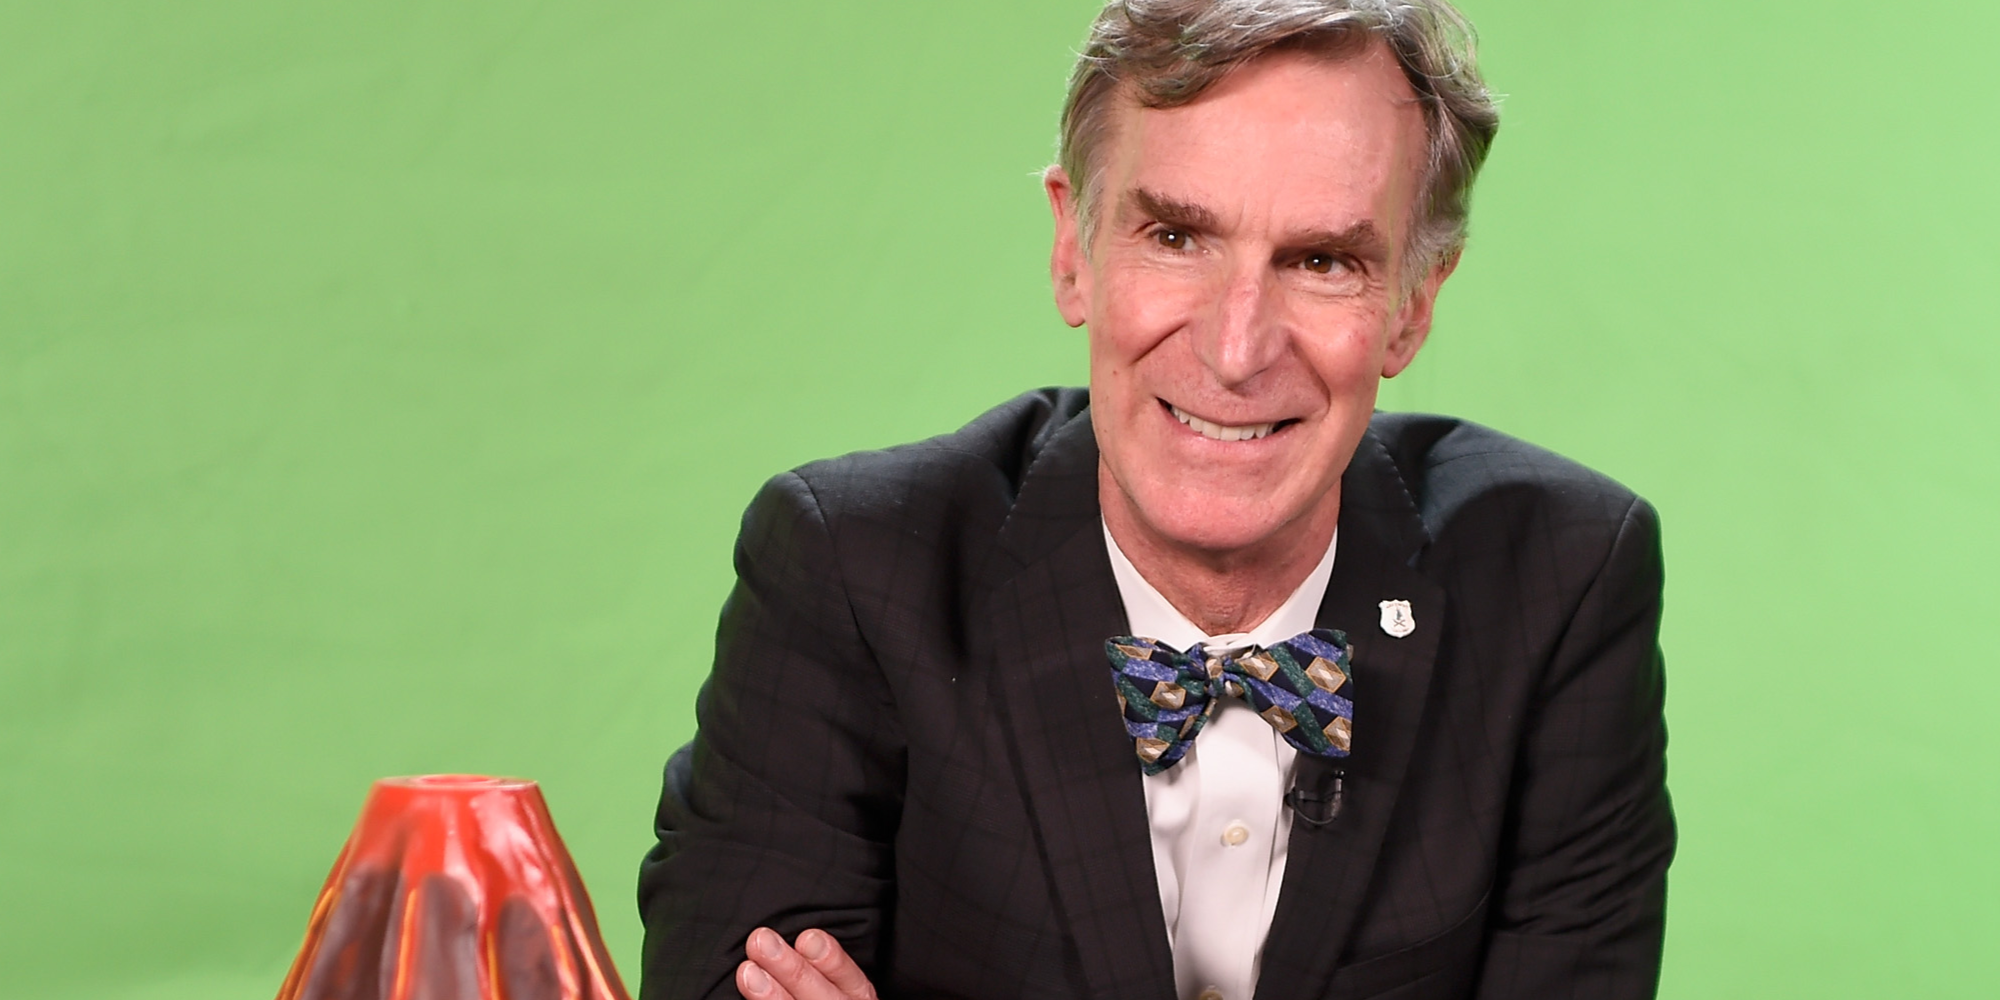 Bill Nye has a new show